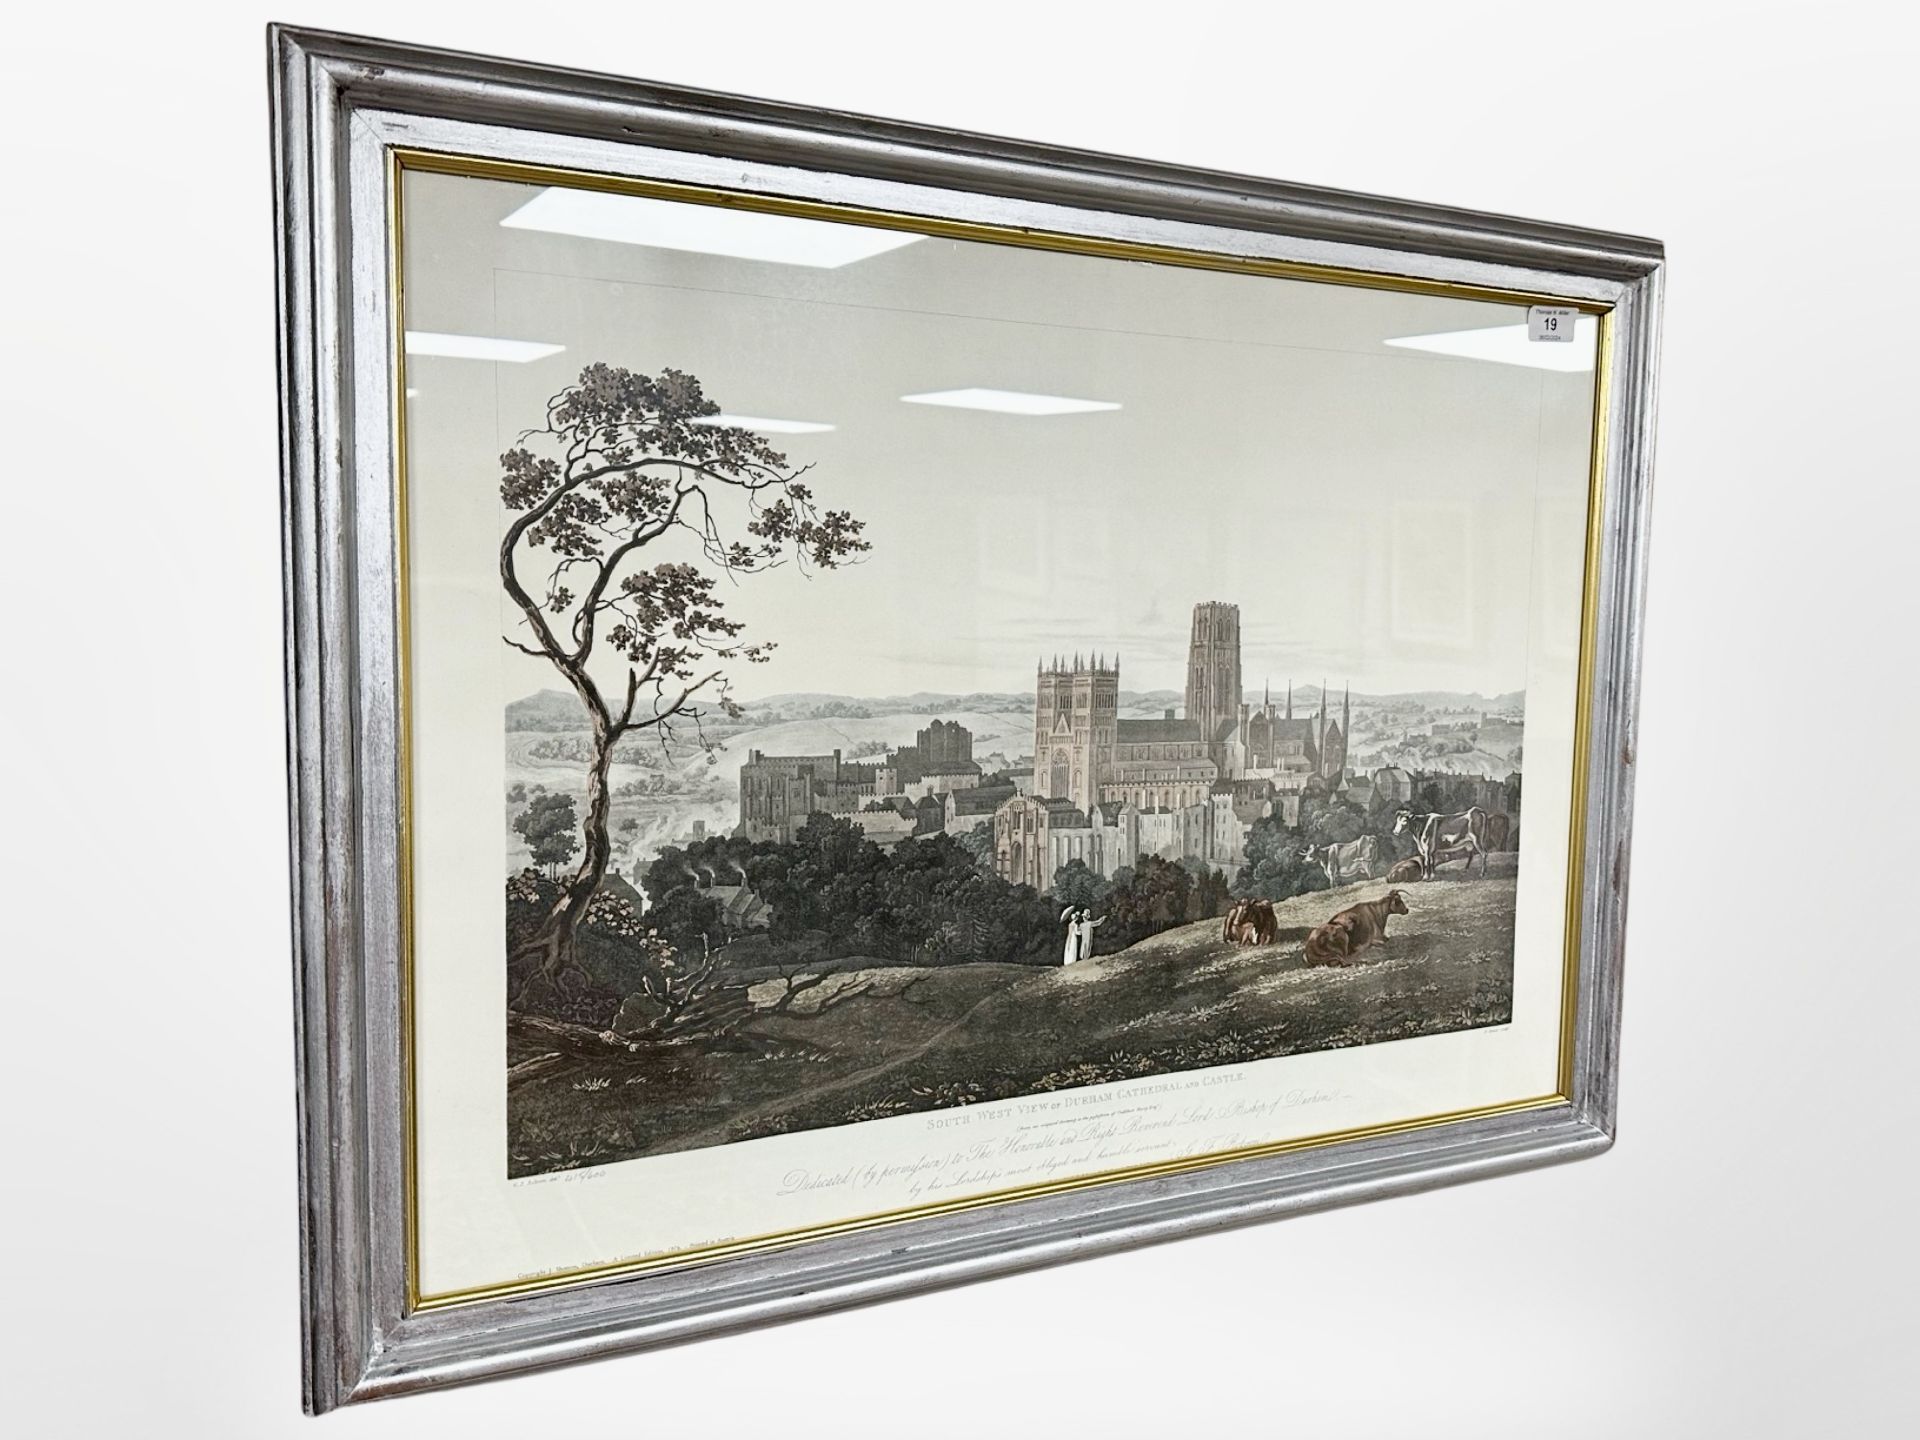 A limited edition colour print depicting the South West view of Durham Cathedral and Castle,